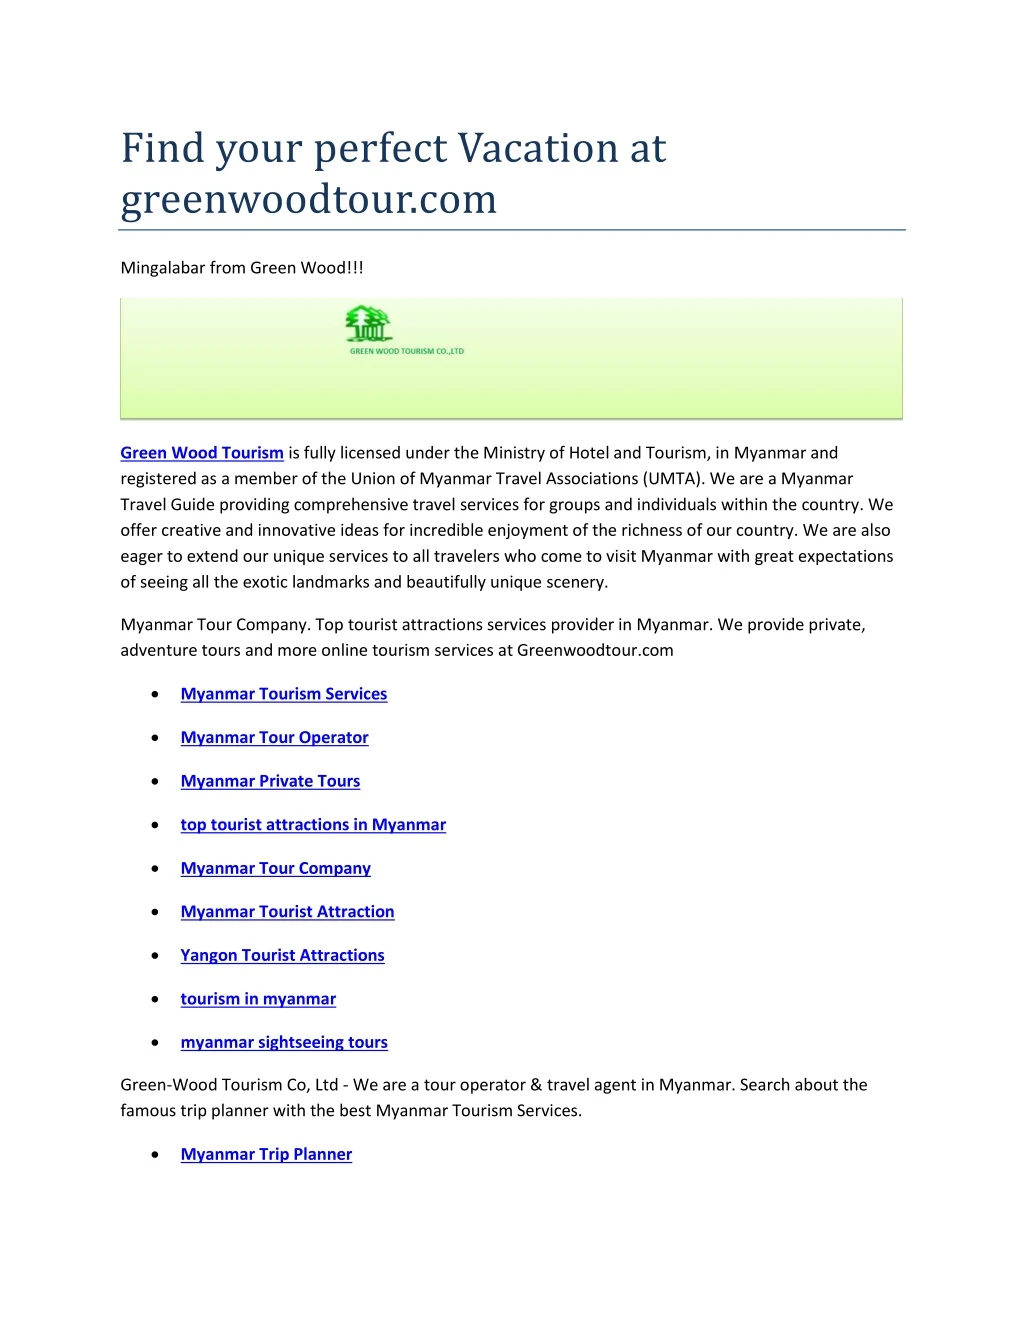 find your perfect vacation at greenwoodtour com